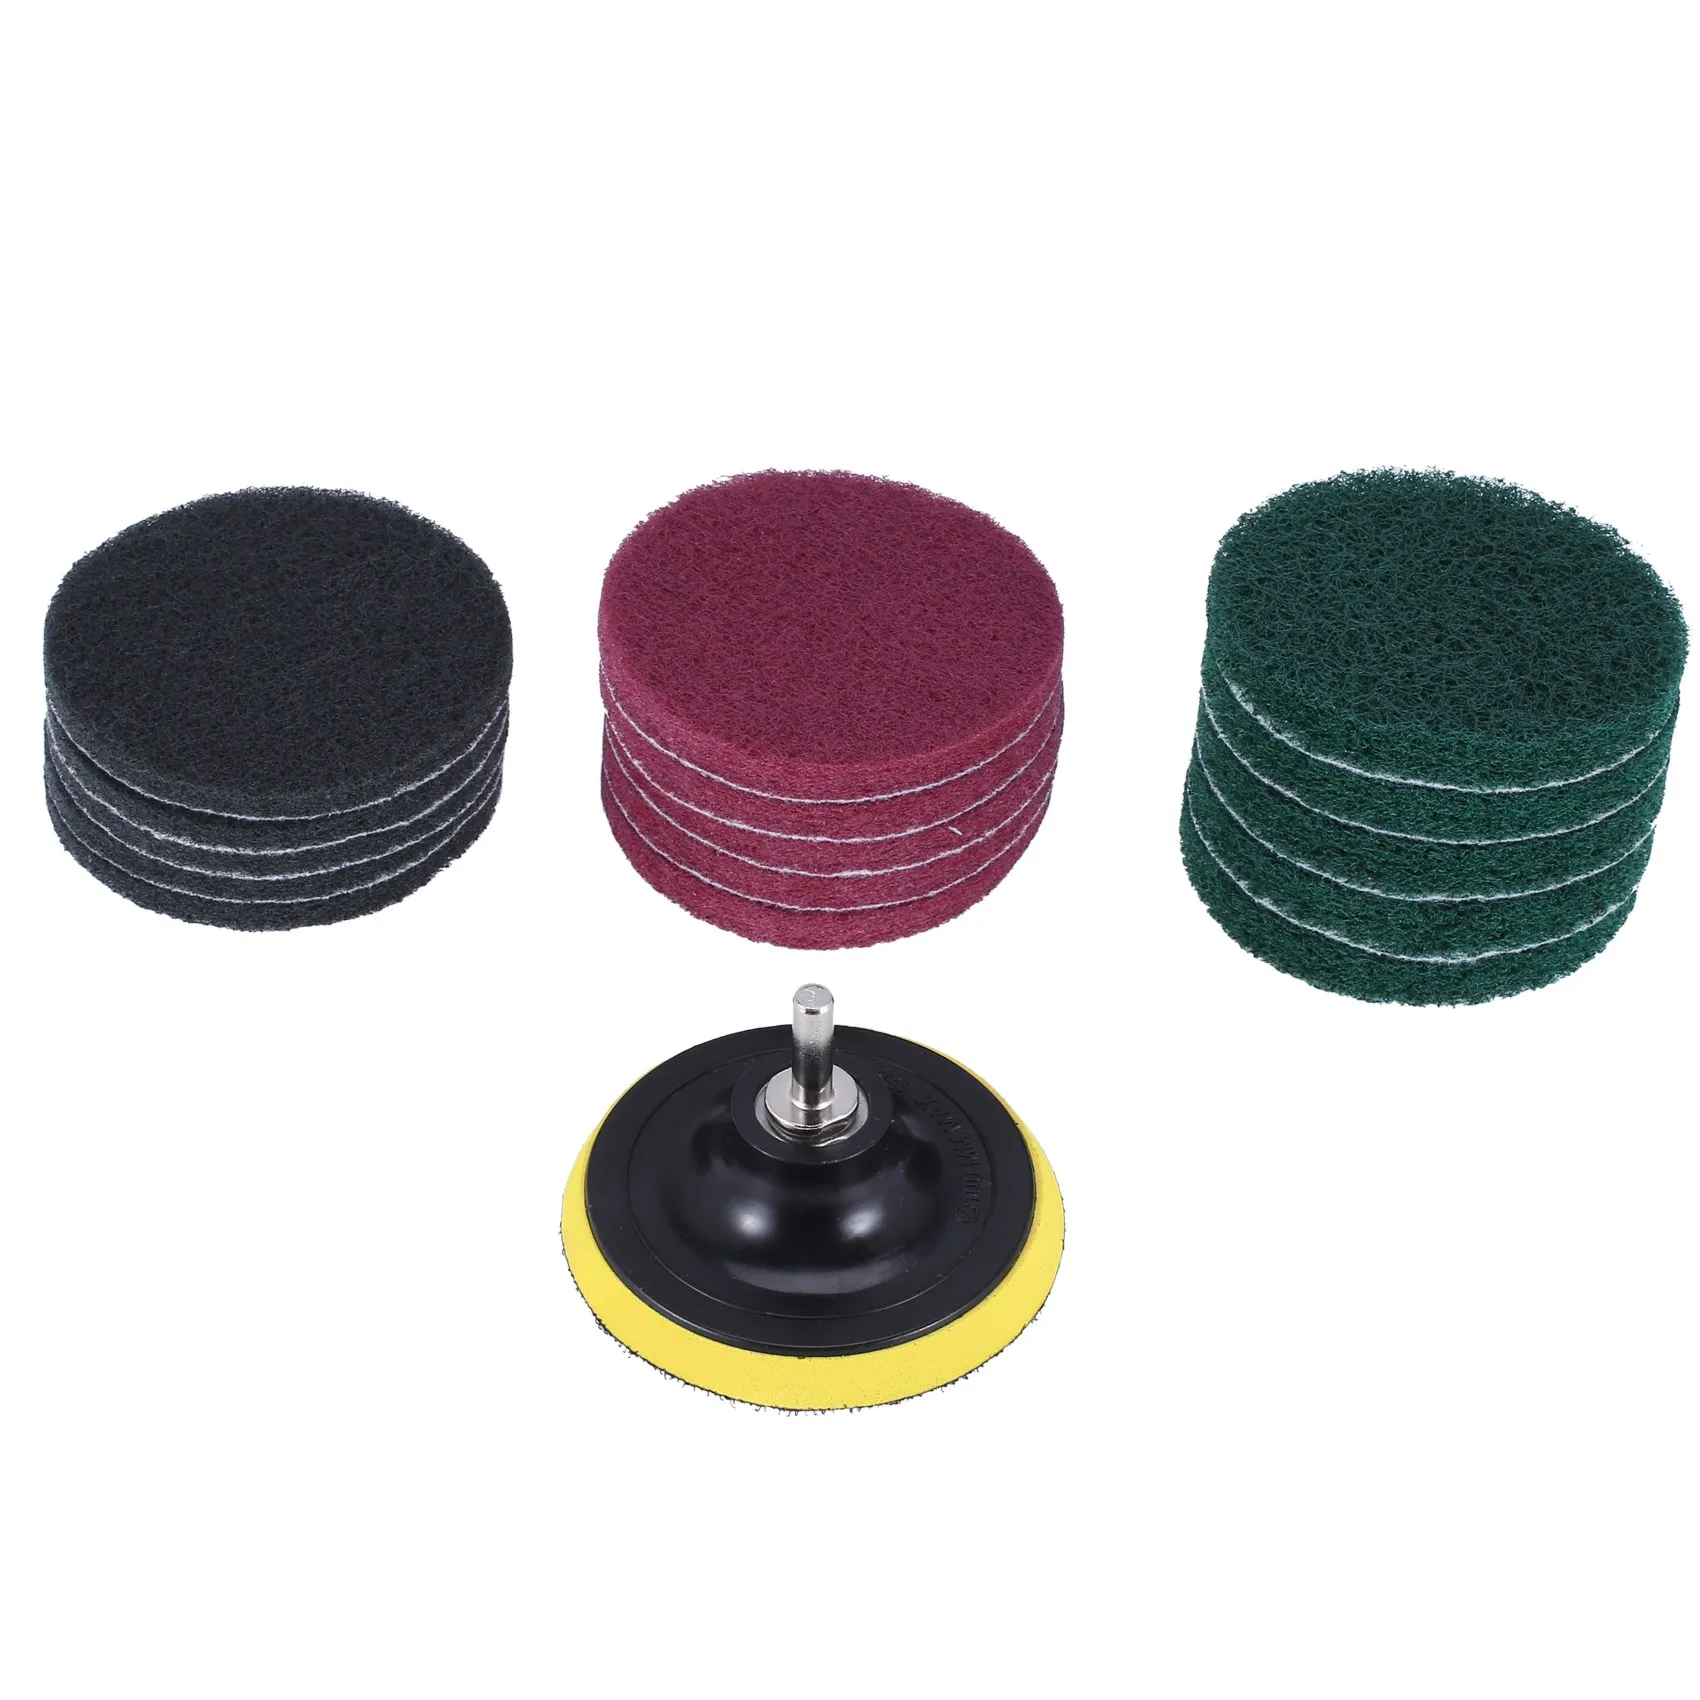 

16Pcs 4 Inch Drill Power Brush Tile Scrubber Scouring Pad Cleaning Kit with 4 Inch Disc Pad Holder 3 Different Stiffness